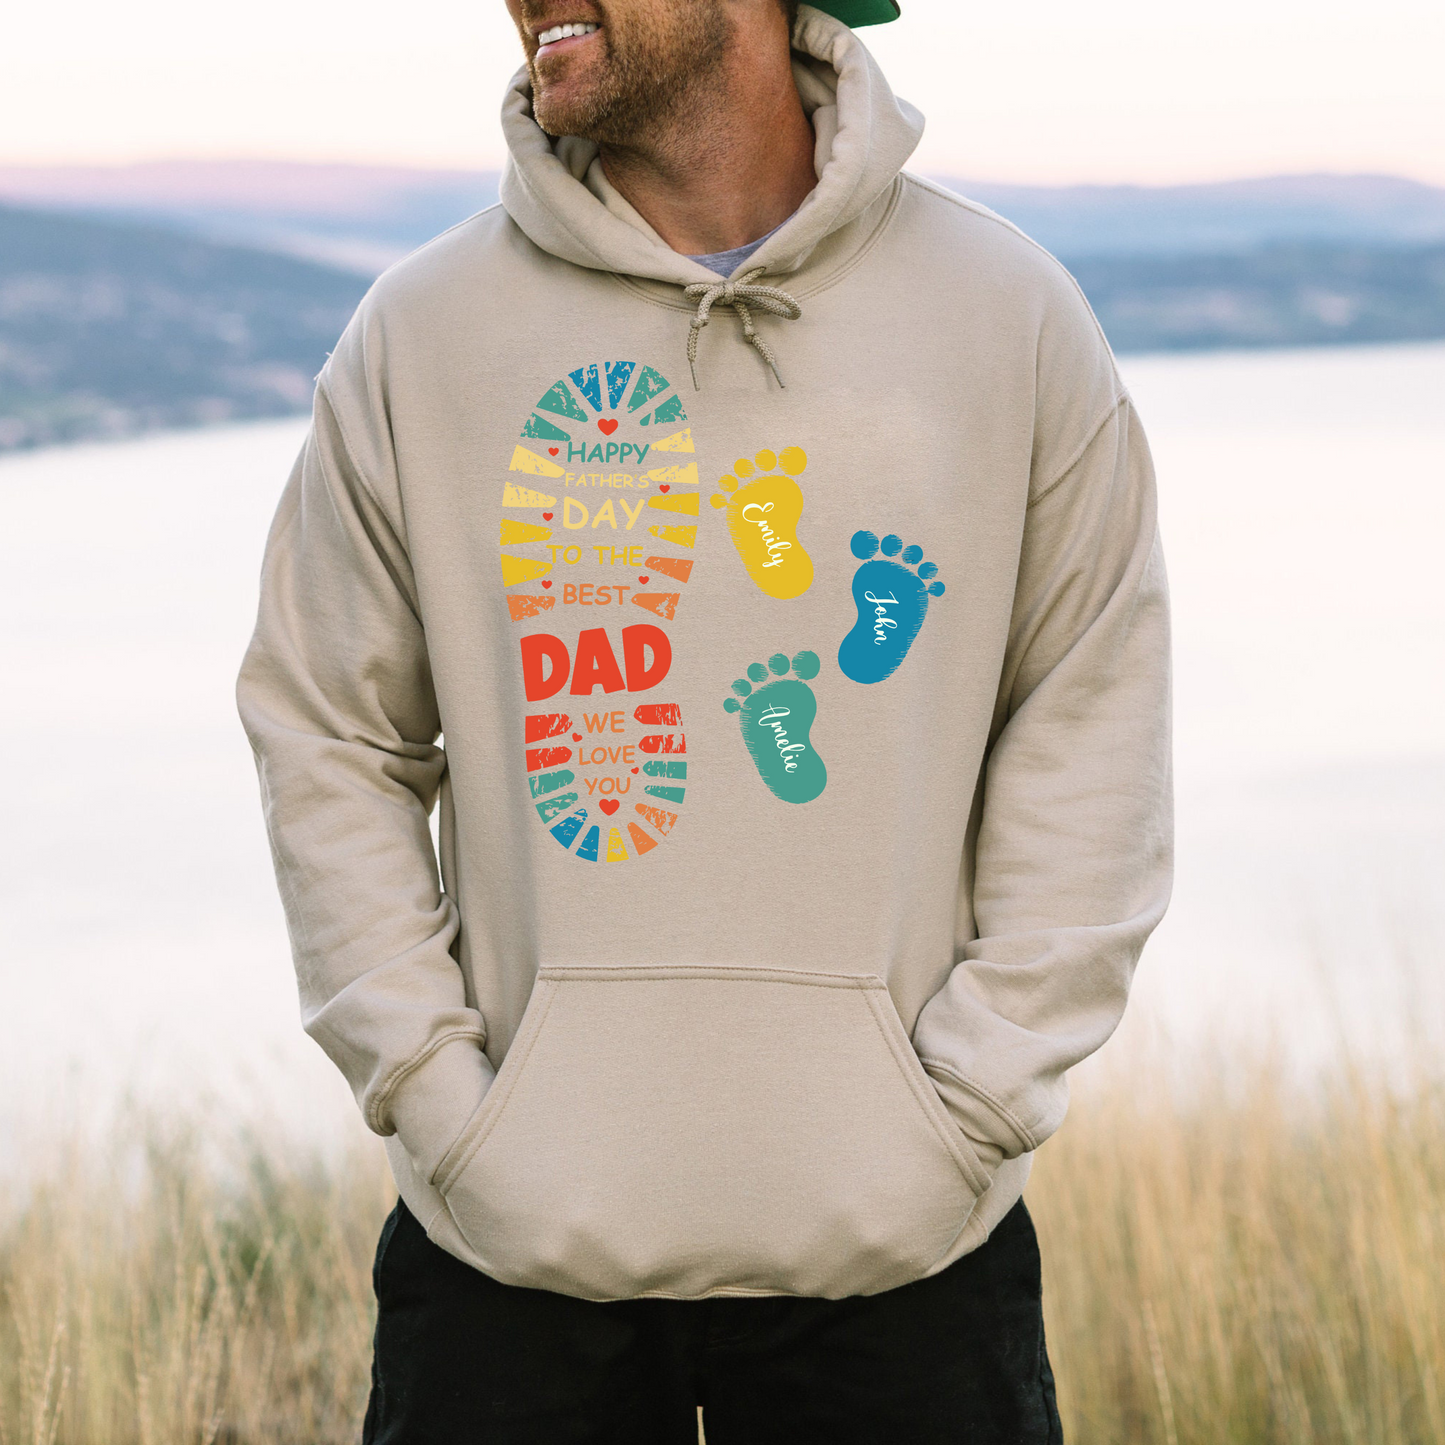 Best Dad - Personalized Father's Day Gift with Kids' Names